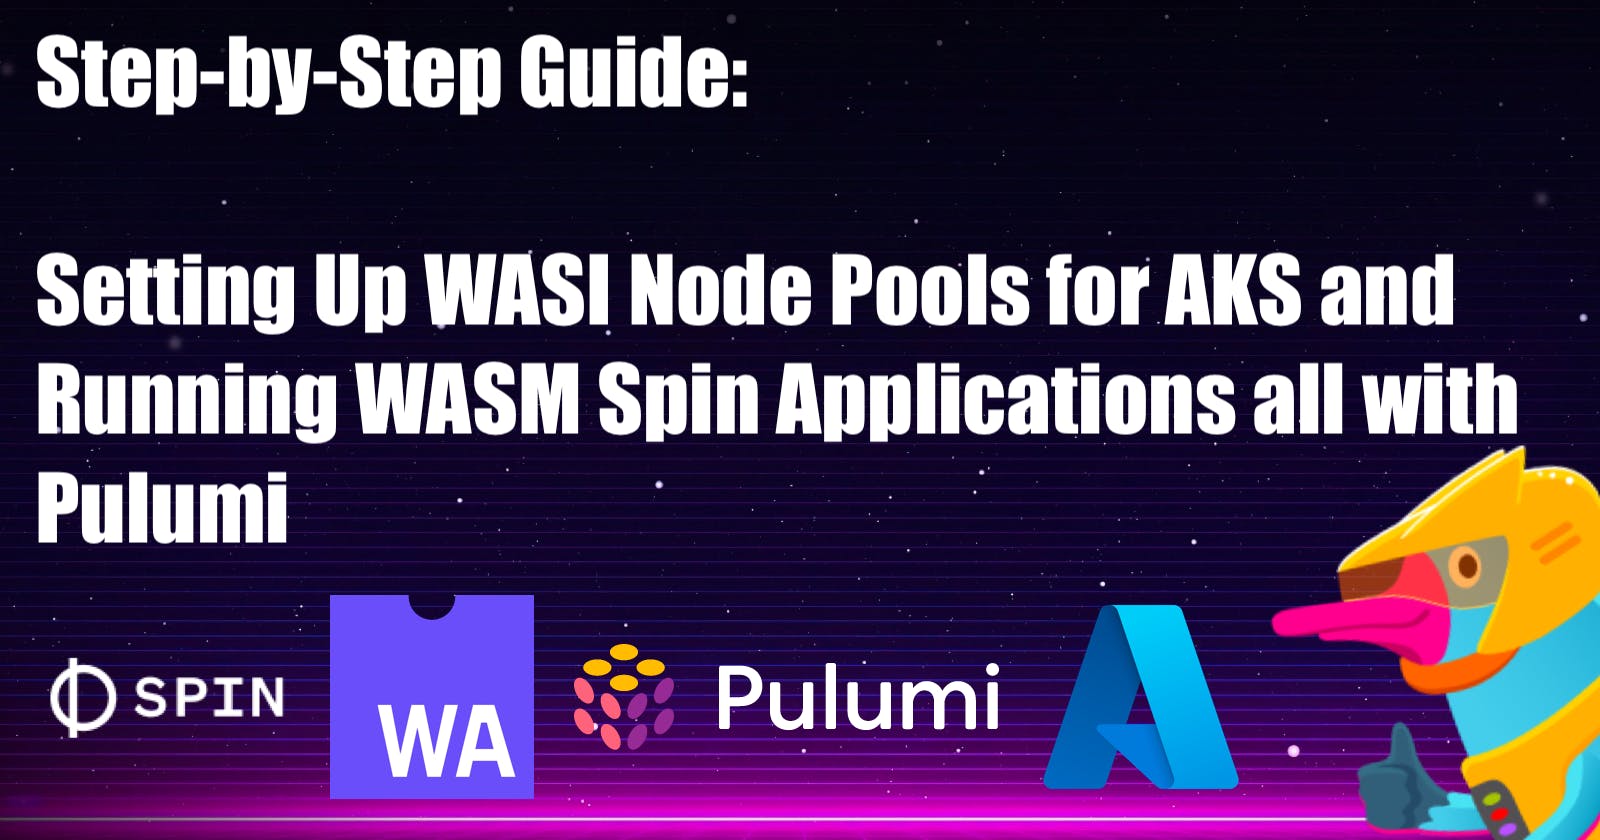 Step-by-Step Guide: Setting Up WASI Node Pools for AKS and Running WASM Spin Applications all with Pulumi